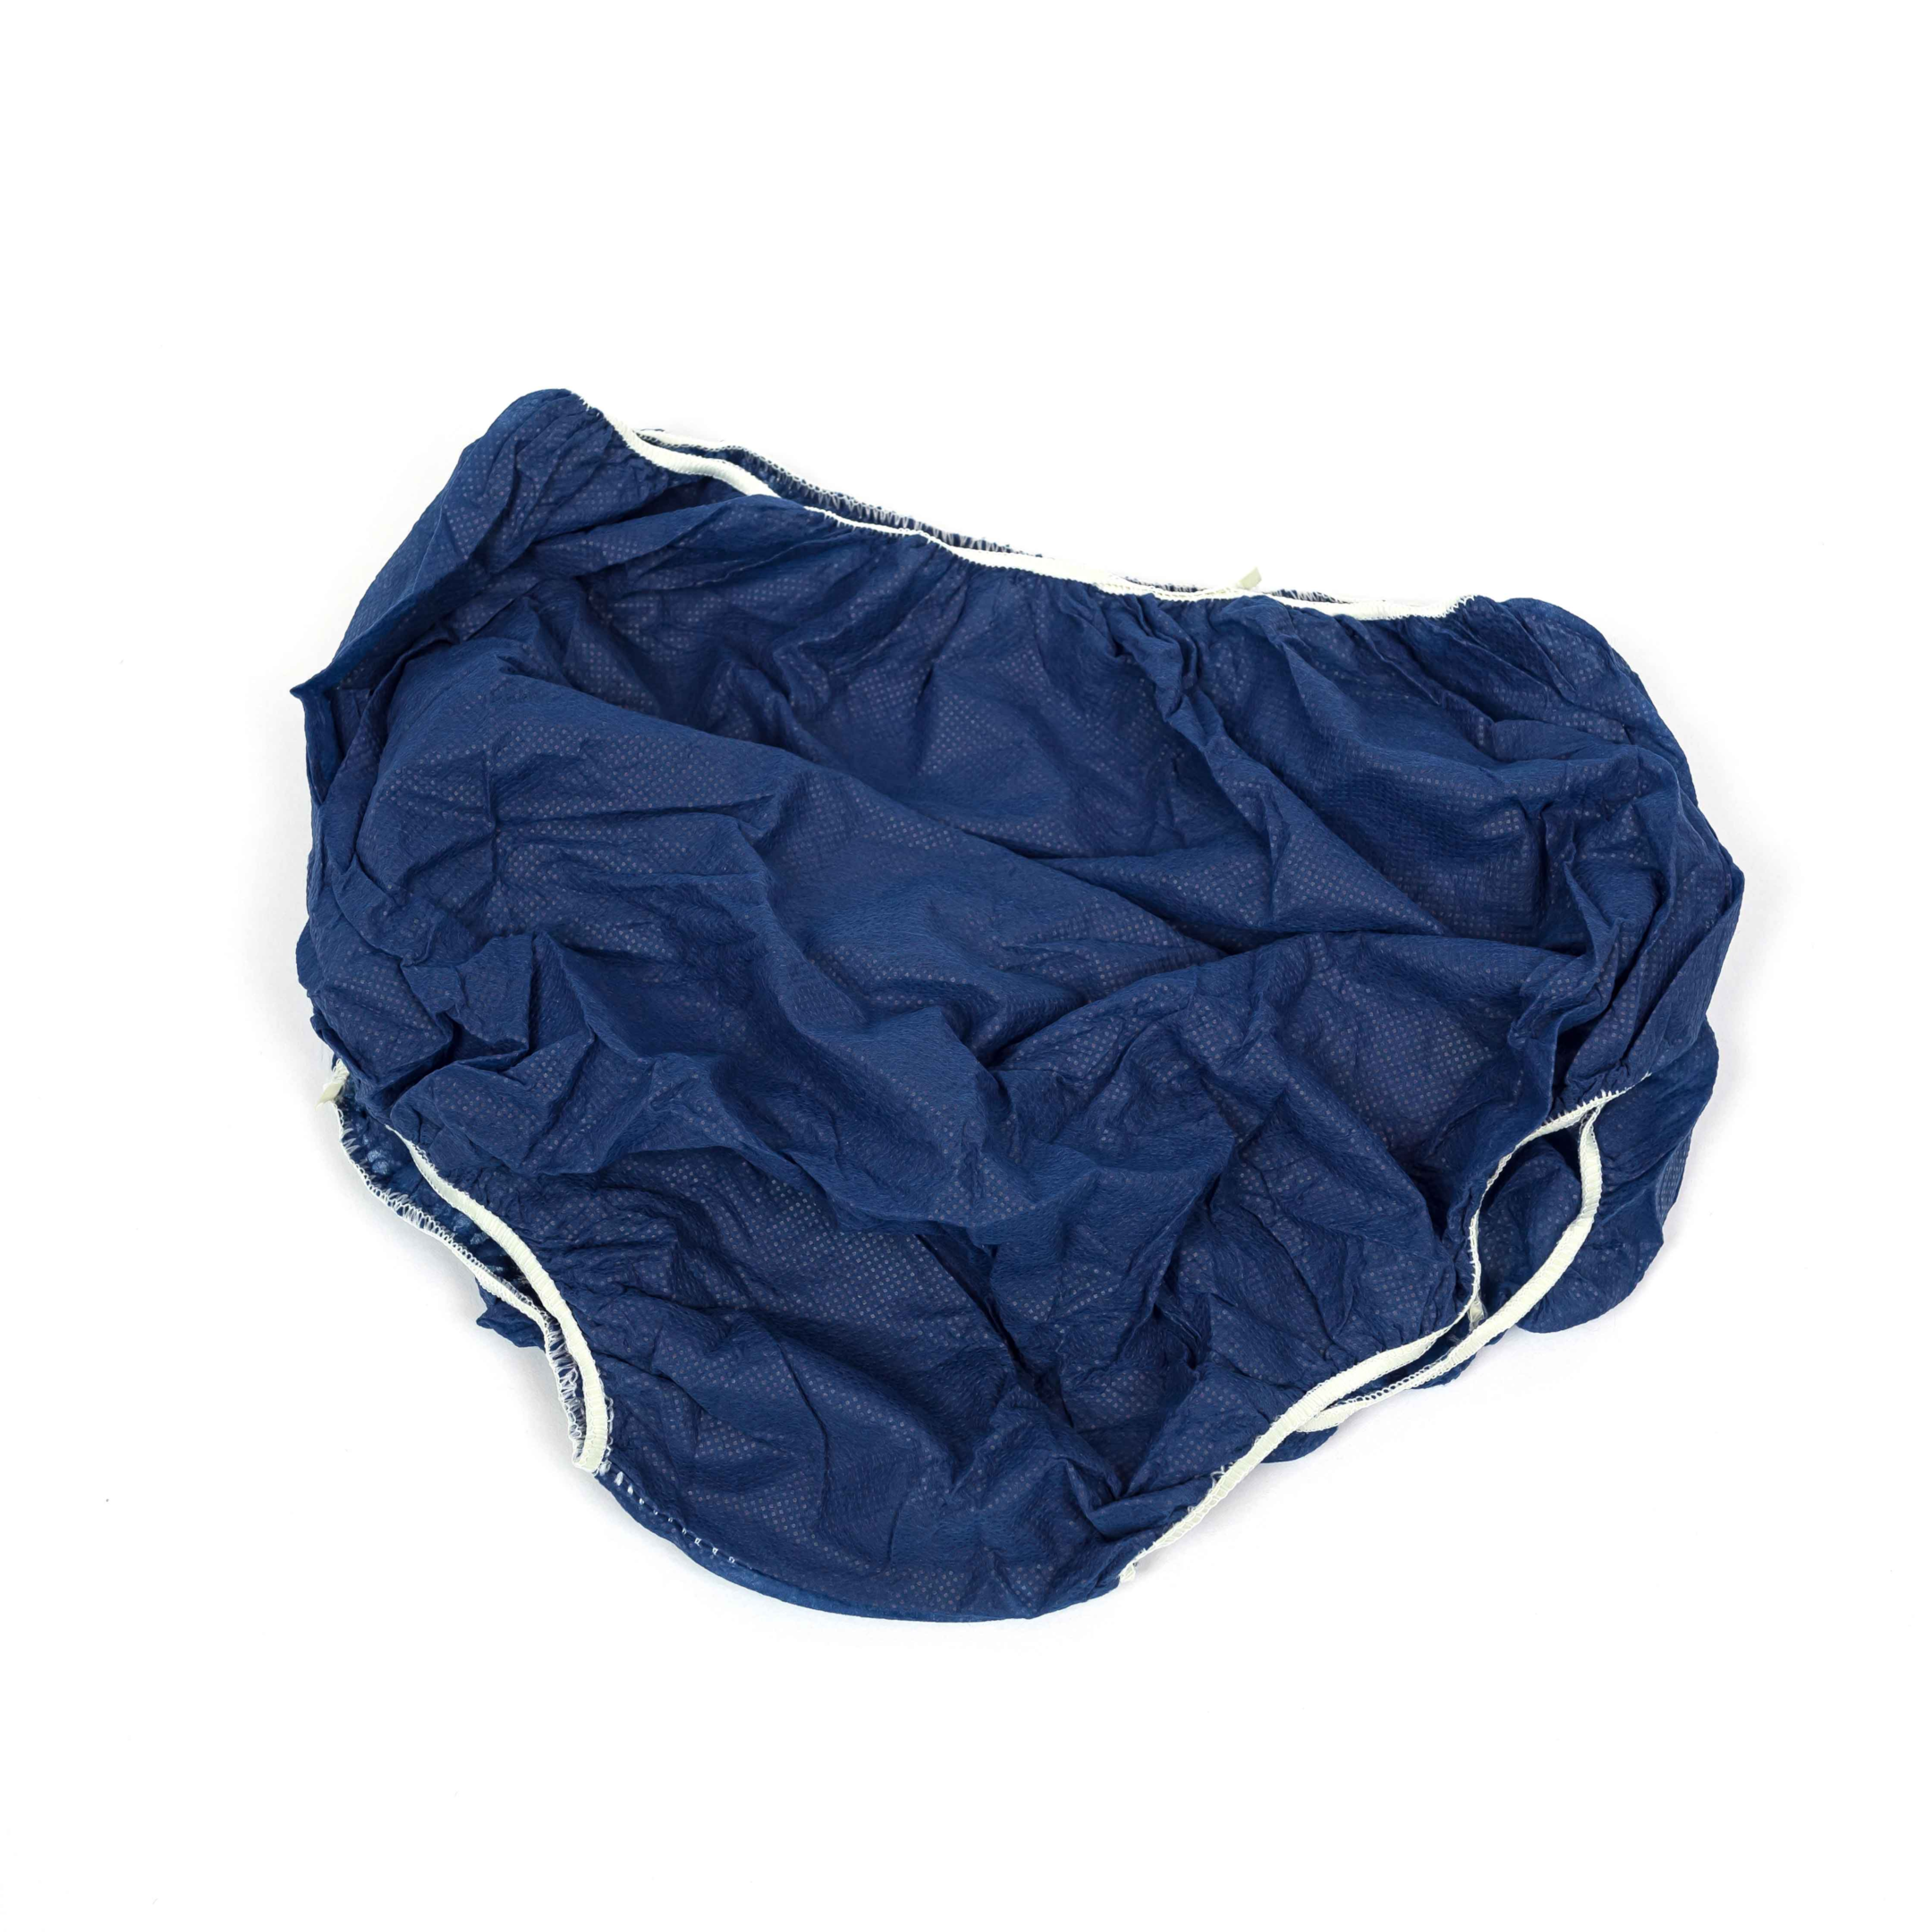 Discover the Benefits of Postpartum Underwear: Comfort & Recovery